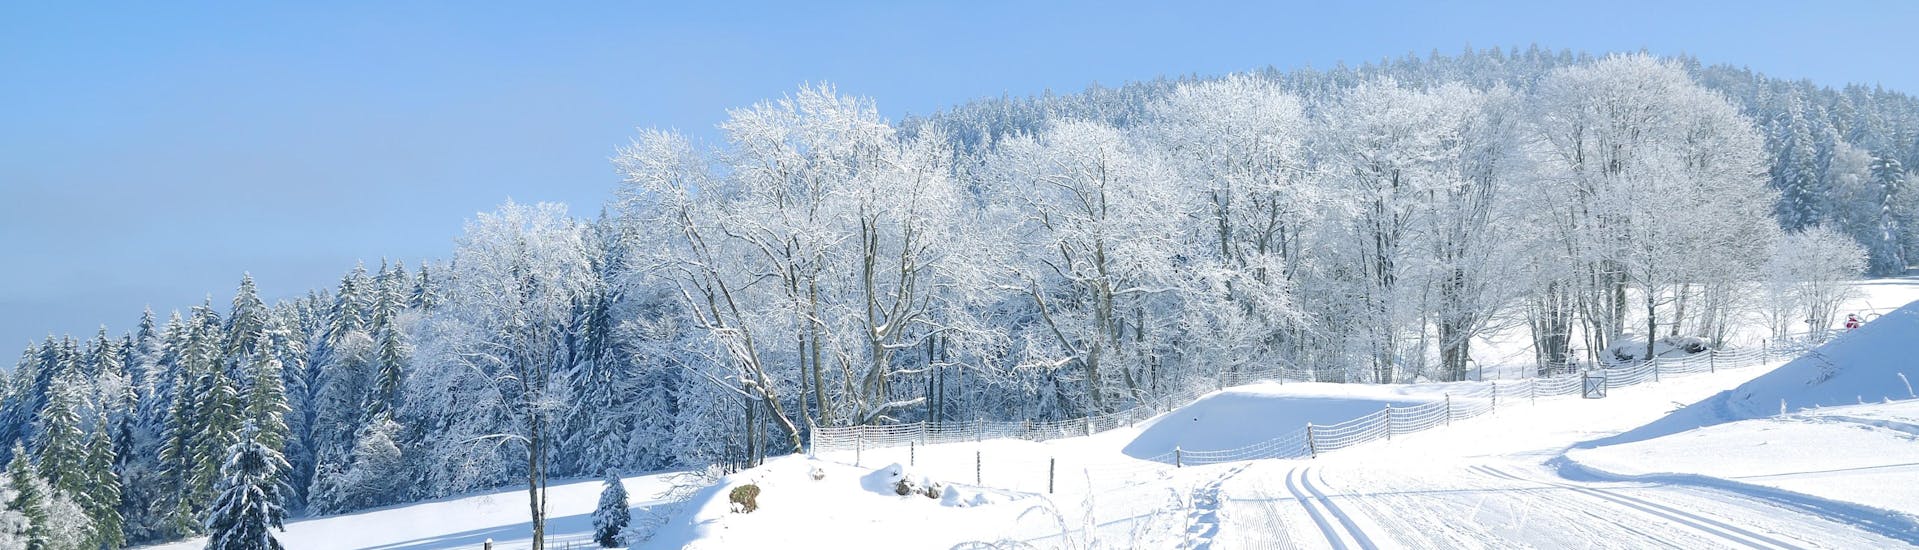 Image of the slopes in the Bavarian Forest near Sankt Englmar where you can book ski lessons.